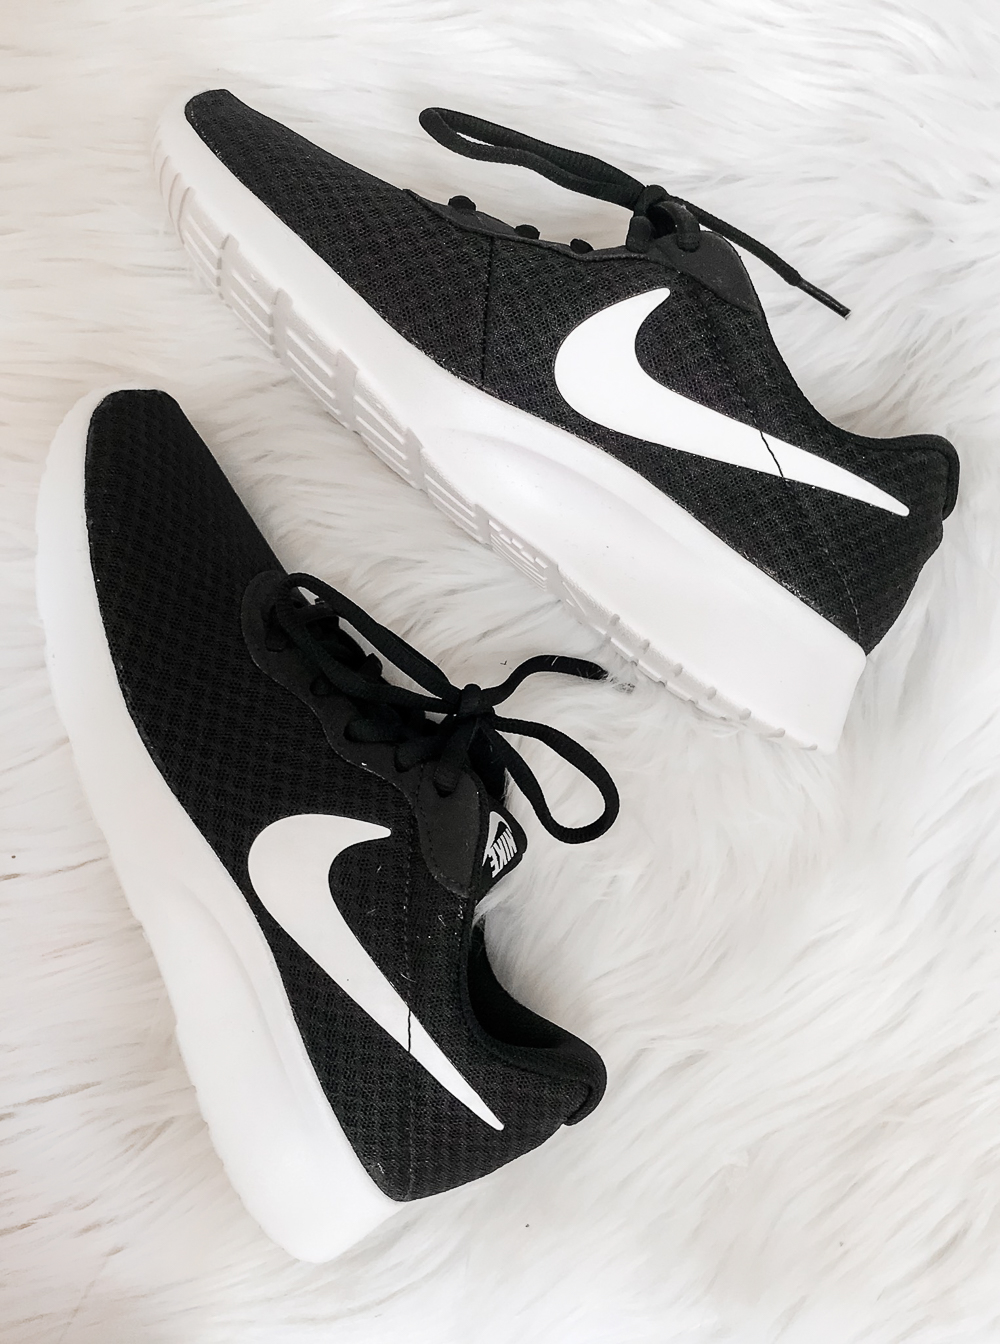 Nike Tanjun Running Shoes in Black and White, Amazon Prime Day Try-On Haul: Top Affordable Fashion Finds